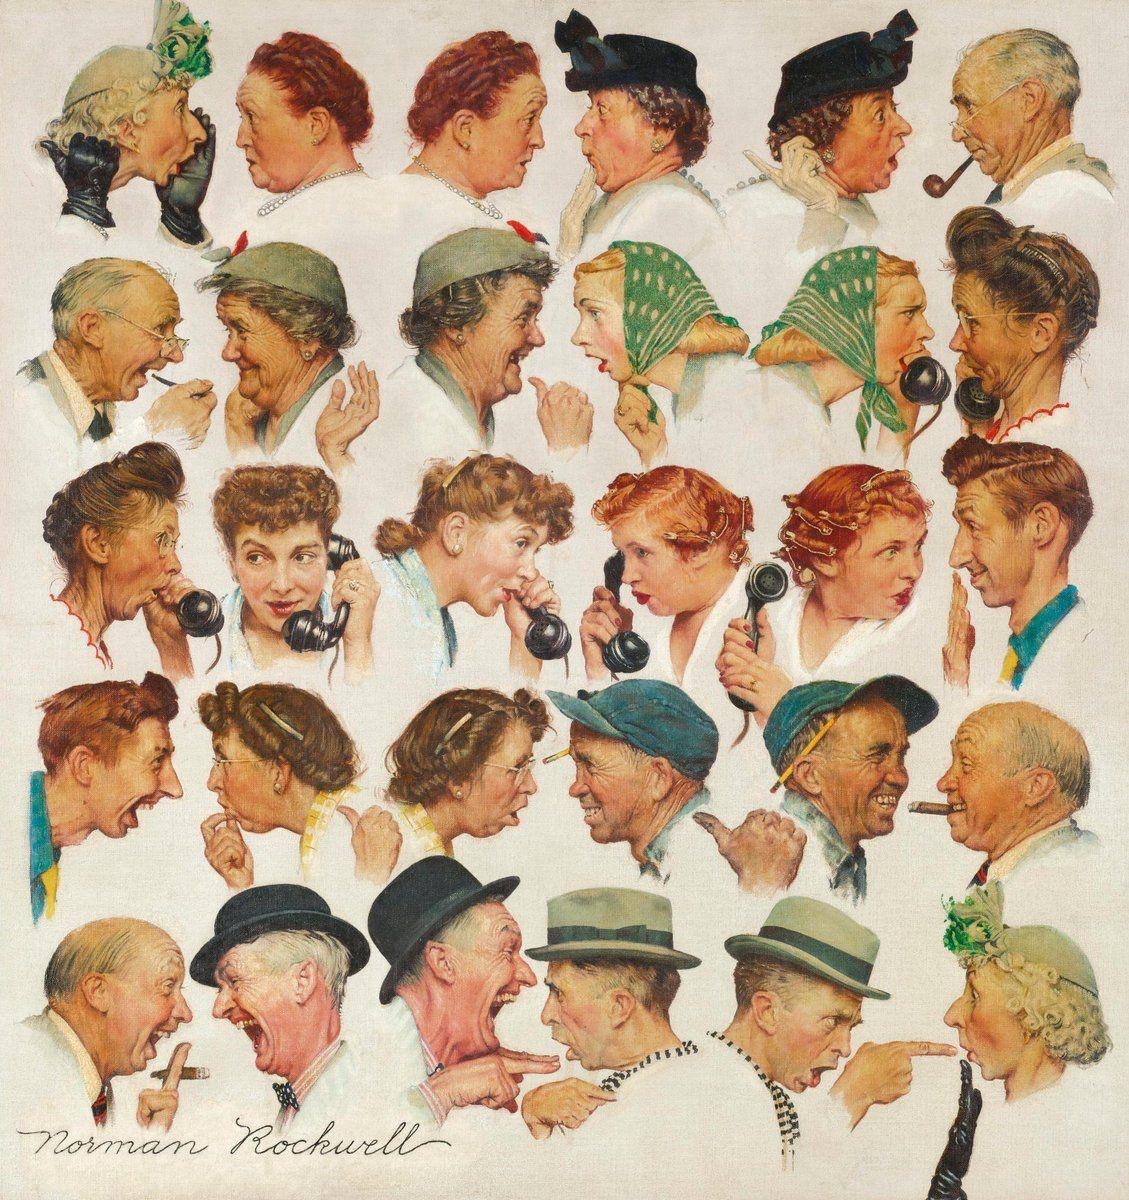 "Chain of Gossip" by Norman Rockwell.